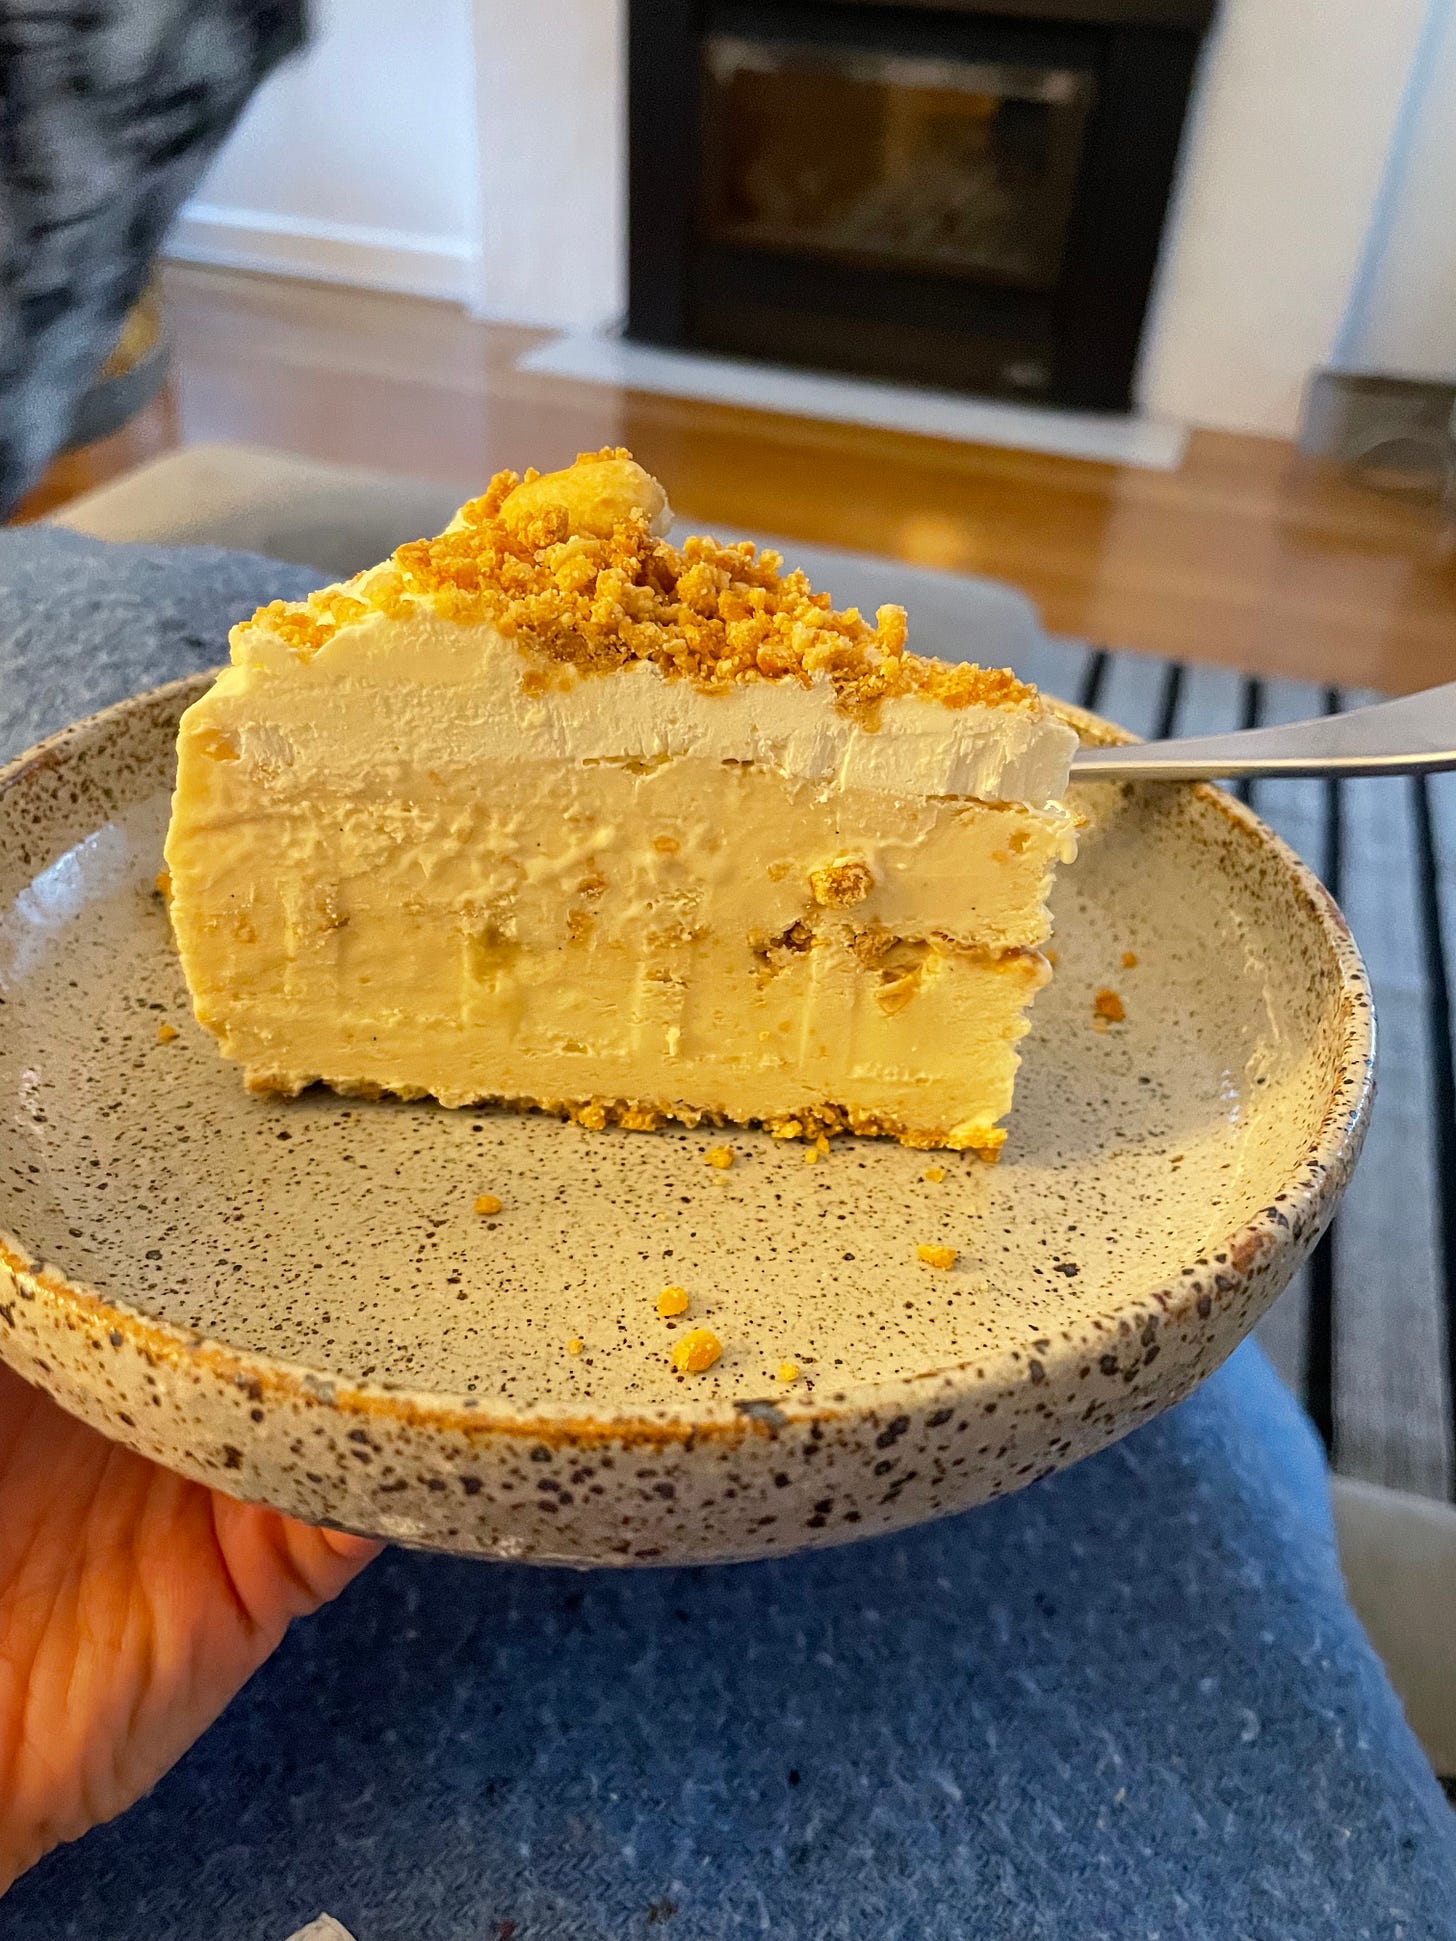 Slice of ice cream cake with a peanut and pretzel crumb, peanut butter and whipped cream, enjoyed on a lounge.